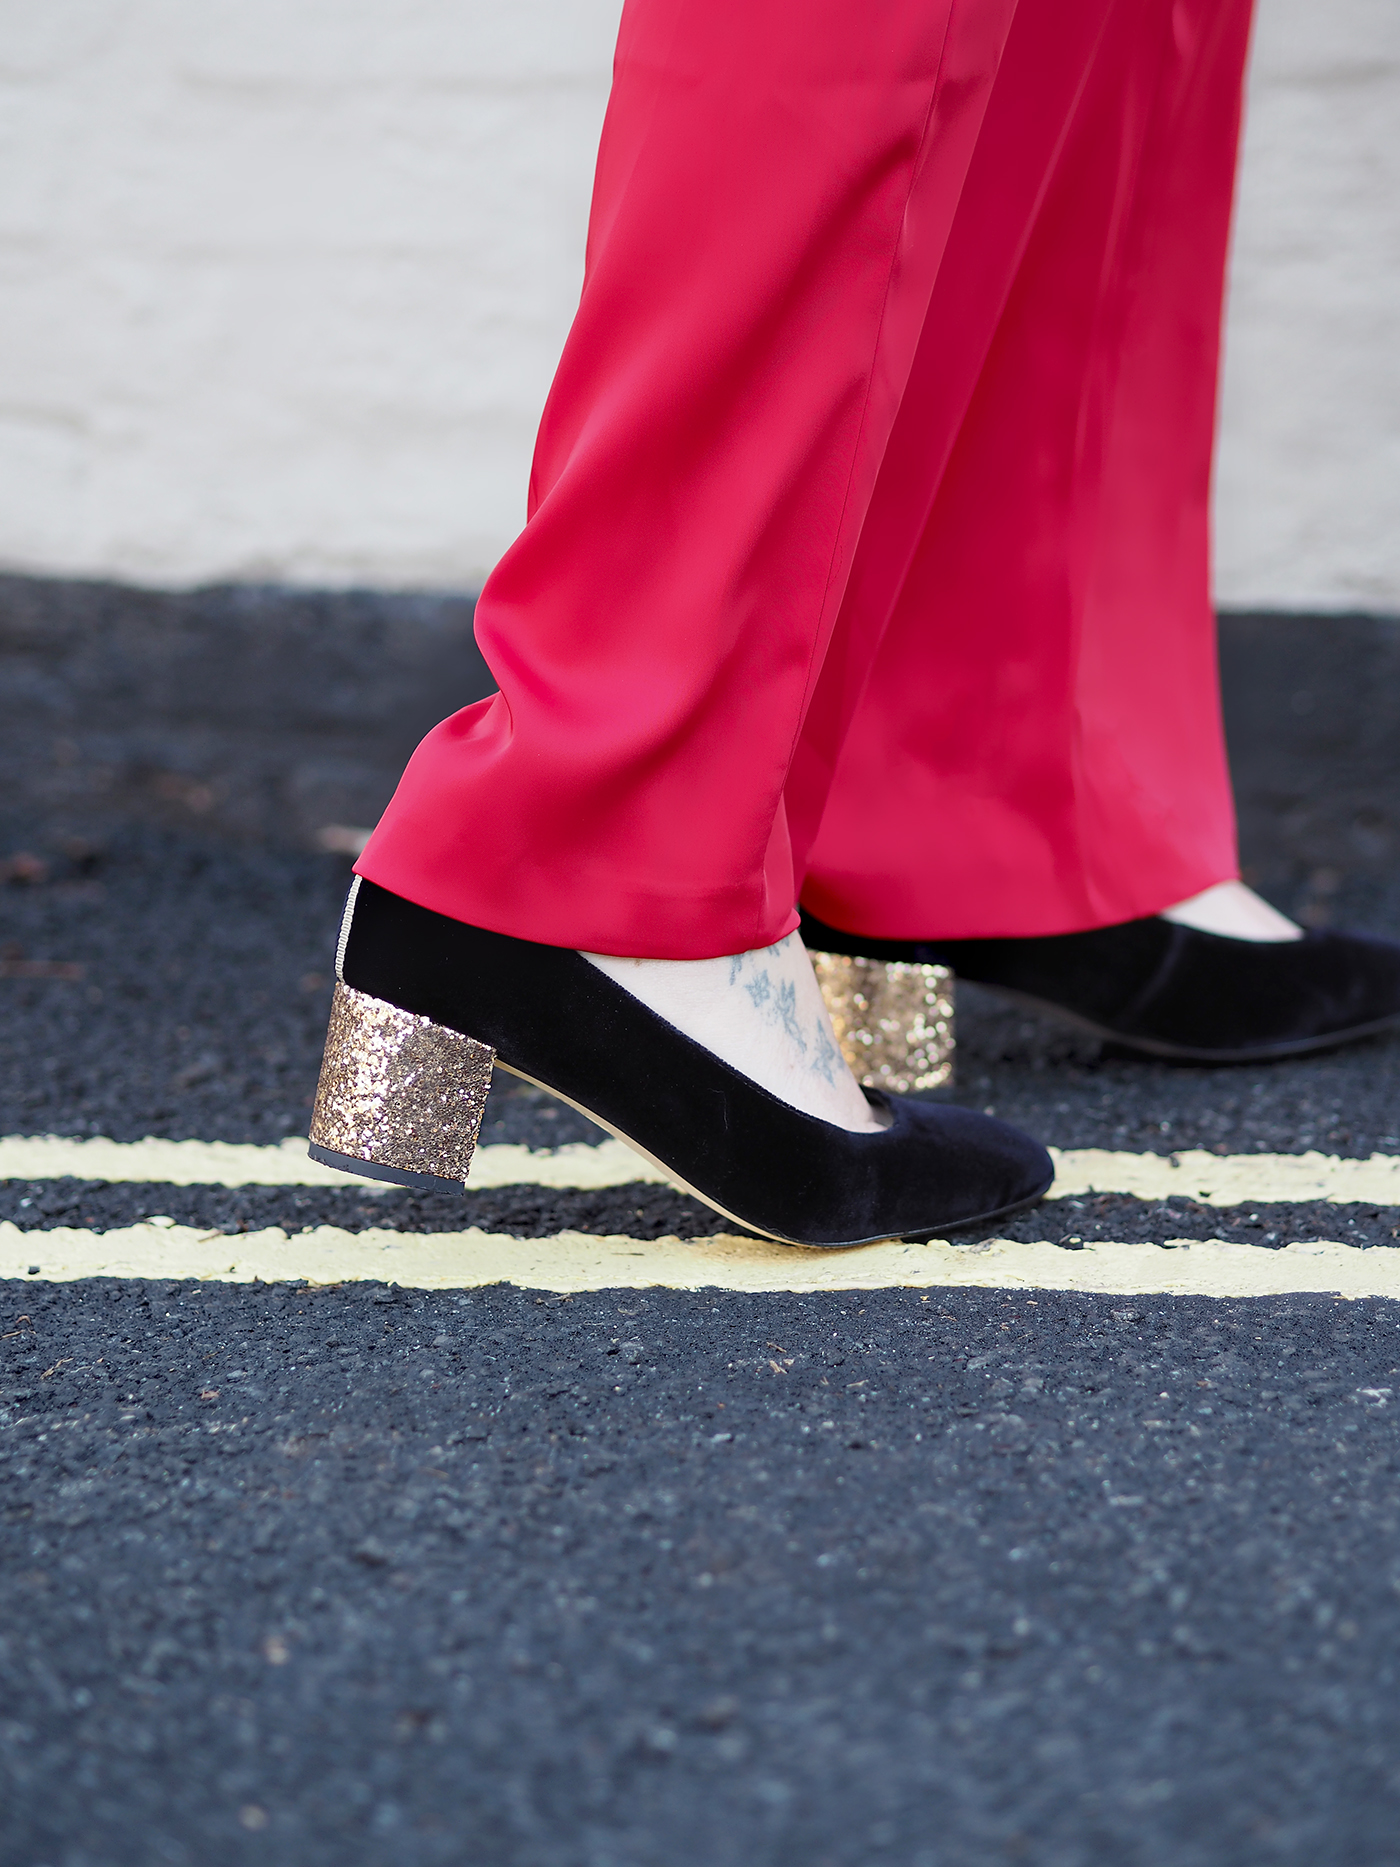 Boden velvet shoes with sparkly heel